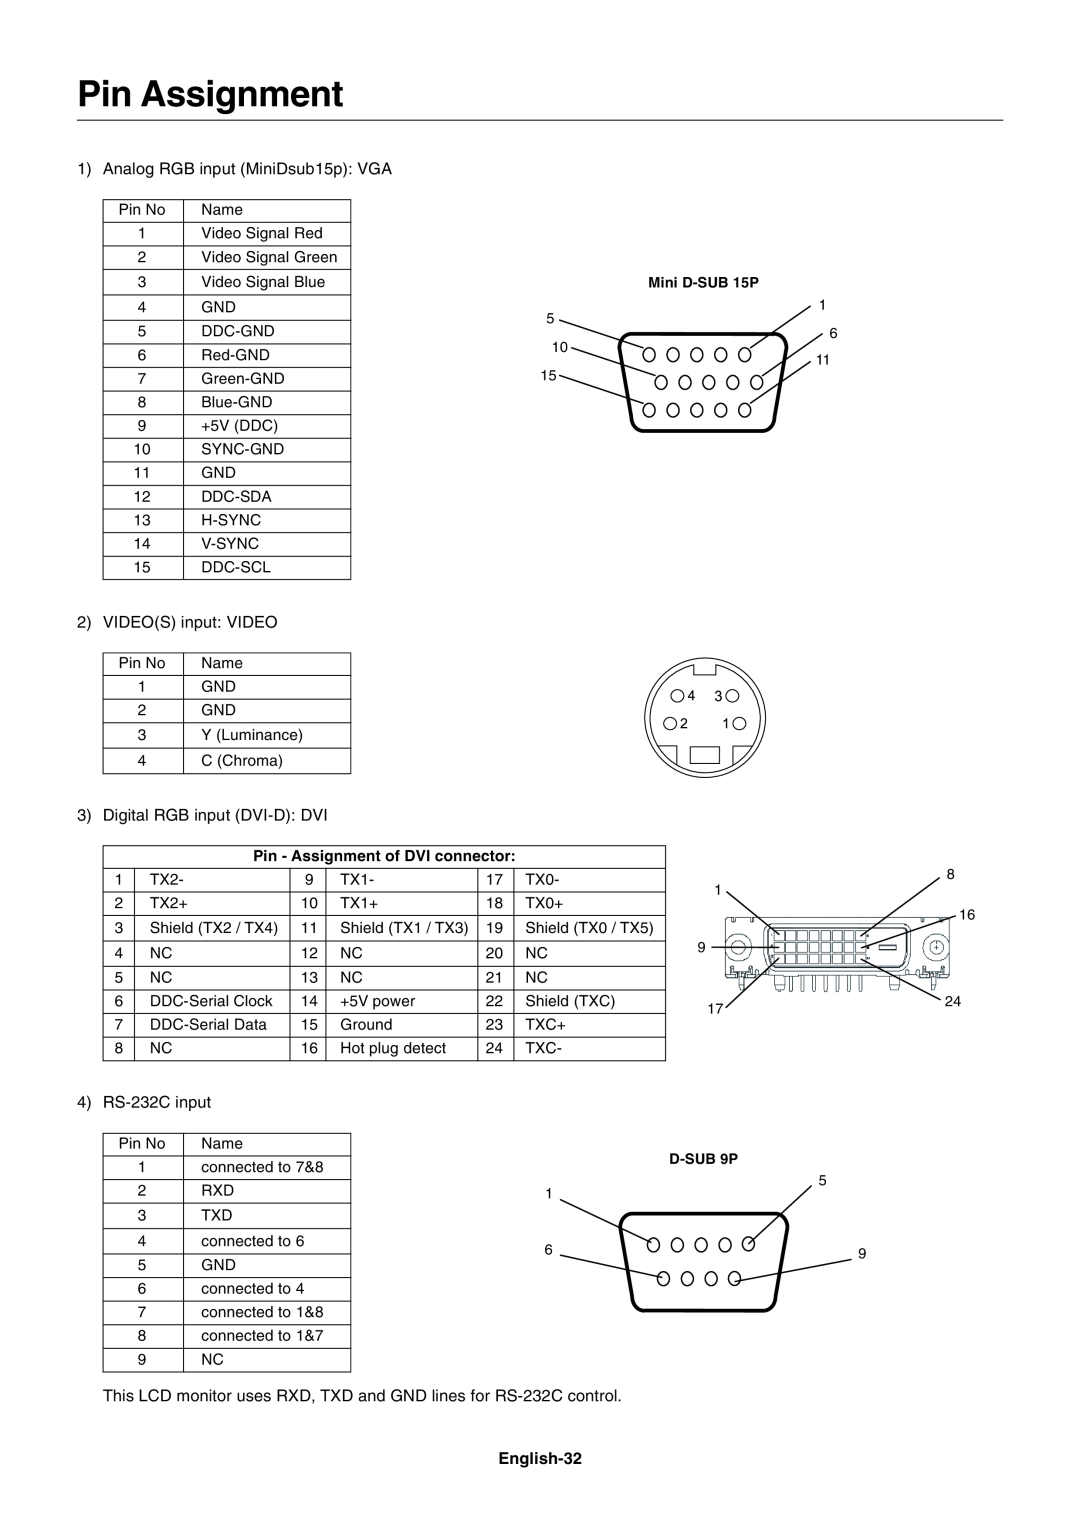 NEC LCD4615 user manual Pin Assignment, English-32, Mini D-SUB 15P, Pin - Assignment of DVI connector, D-SUB 9P 